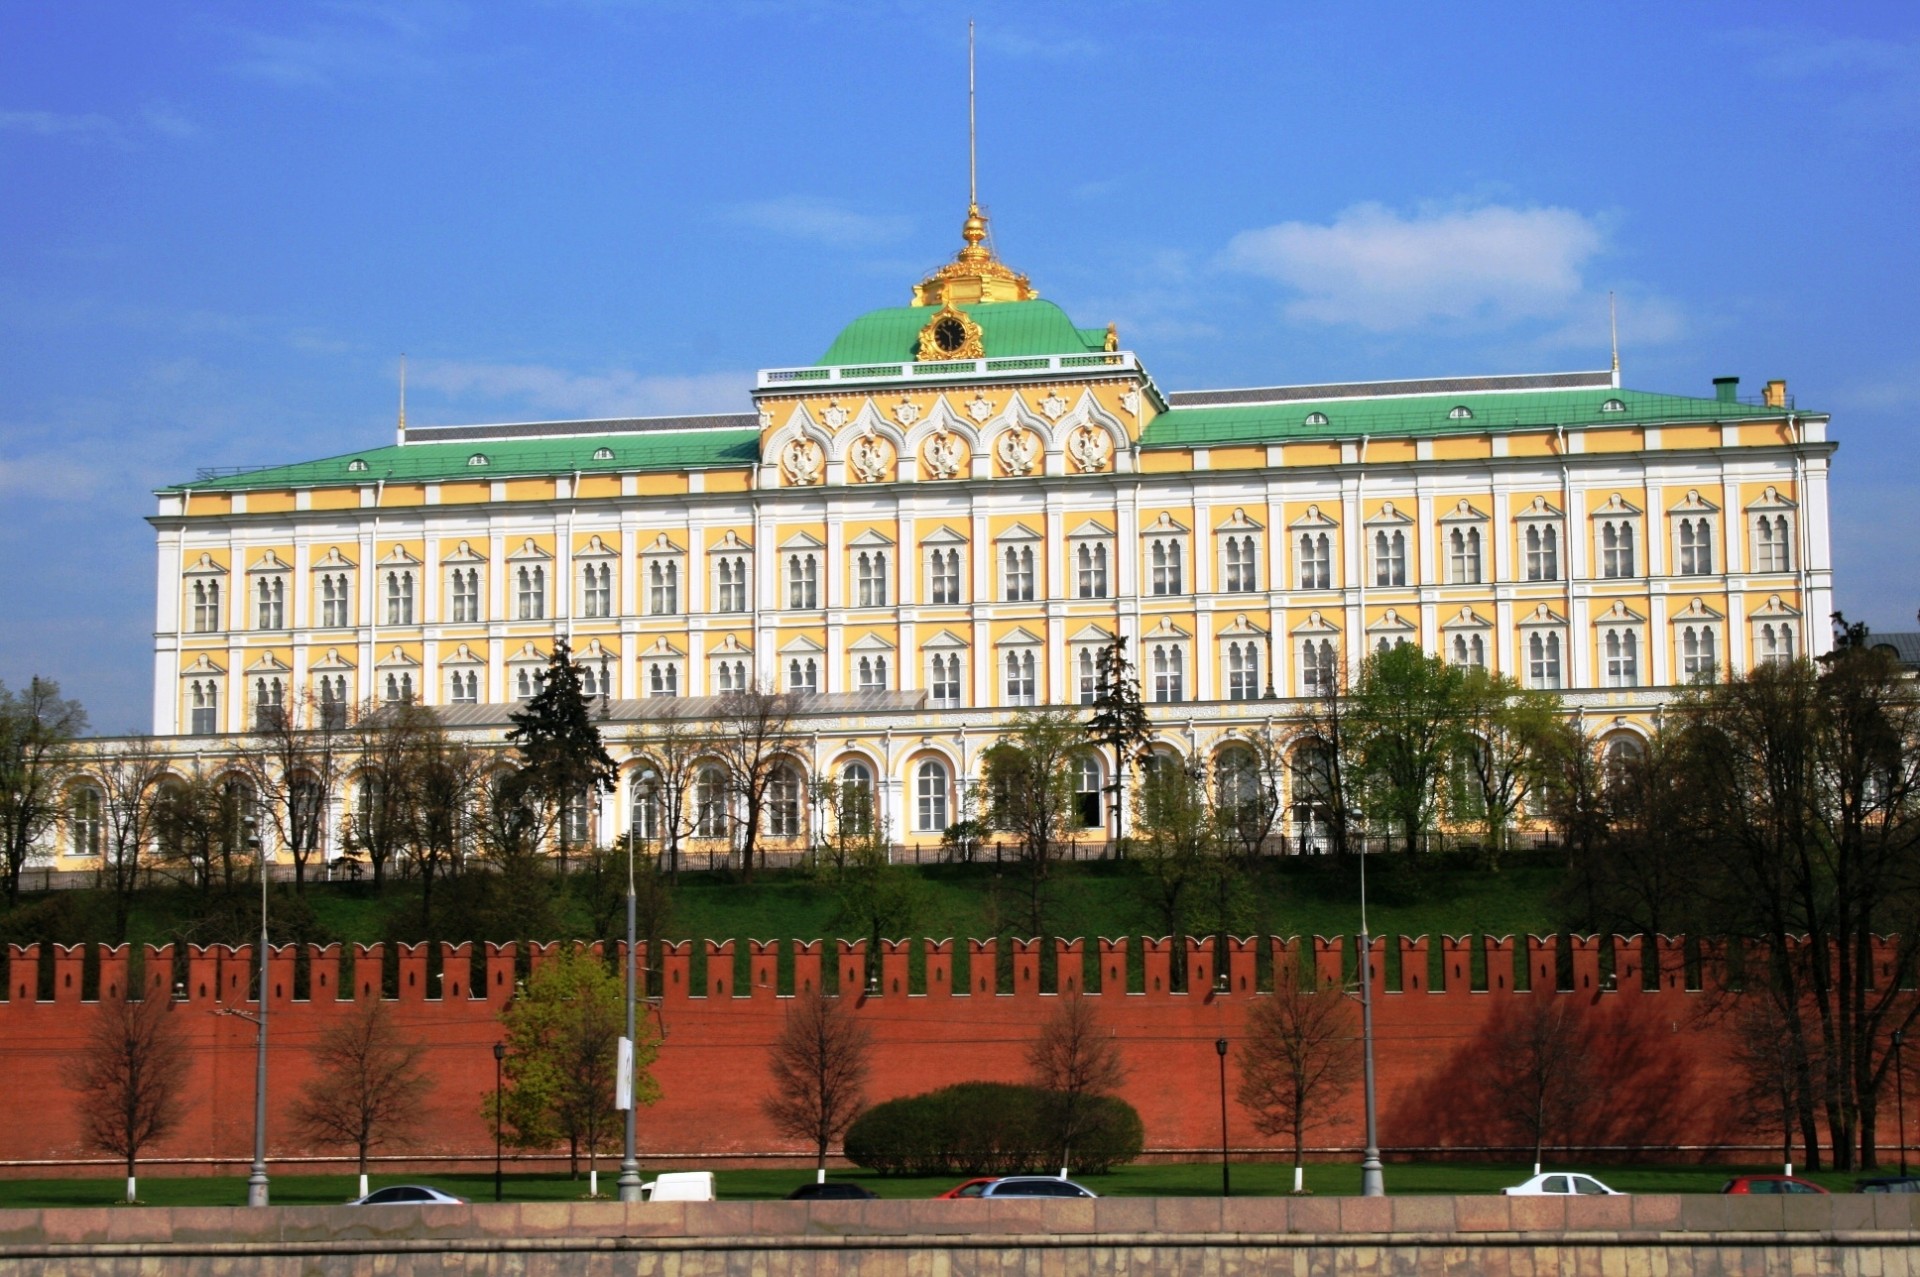 The Great Kremlin Palace, Moscow